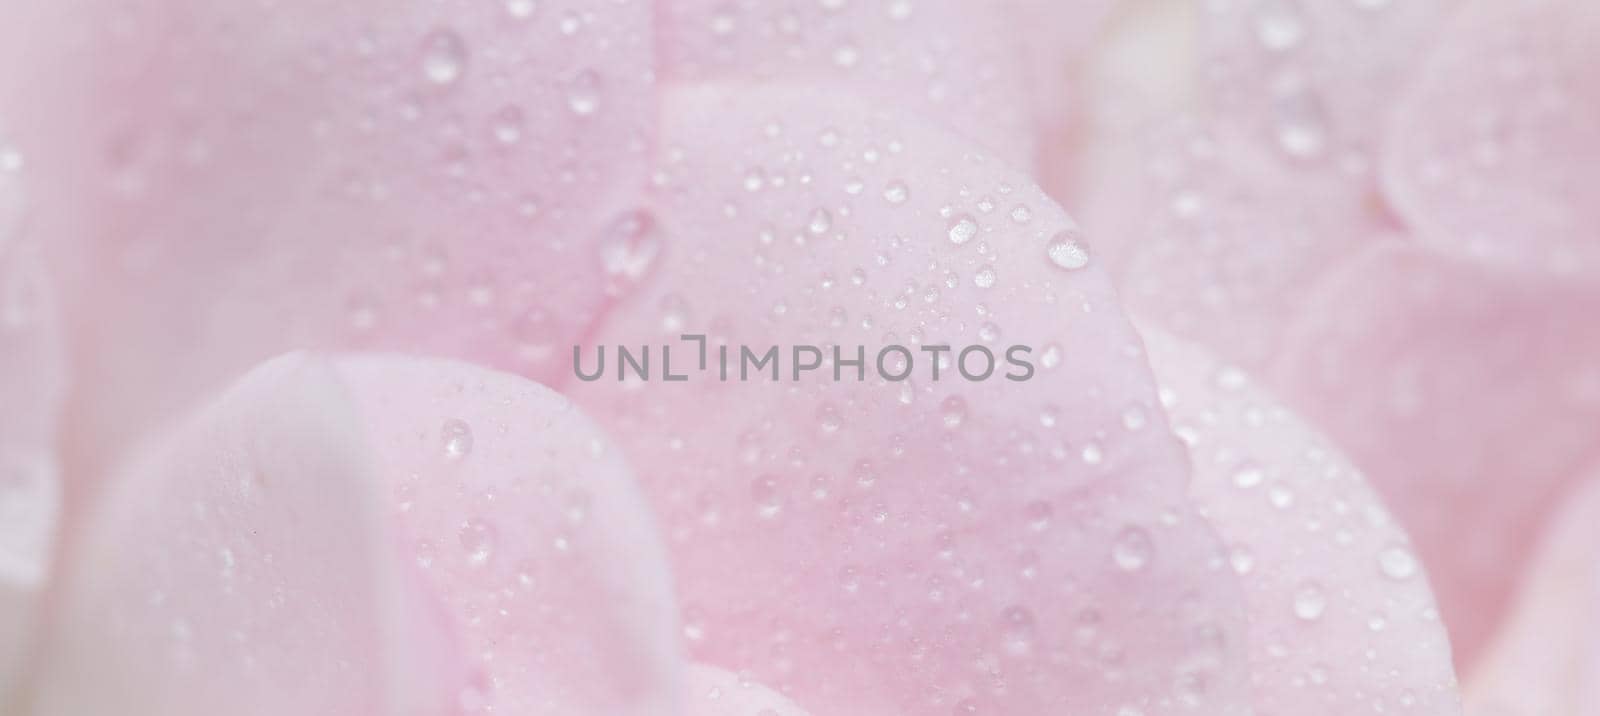 Soft focus, abstract floral background, pink rose flower petals with water drops. Macro flowers backdrop for holiday brand design by Olayola